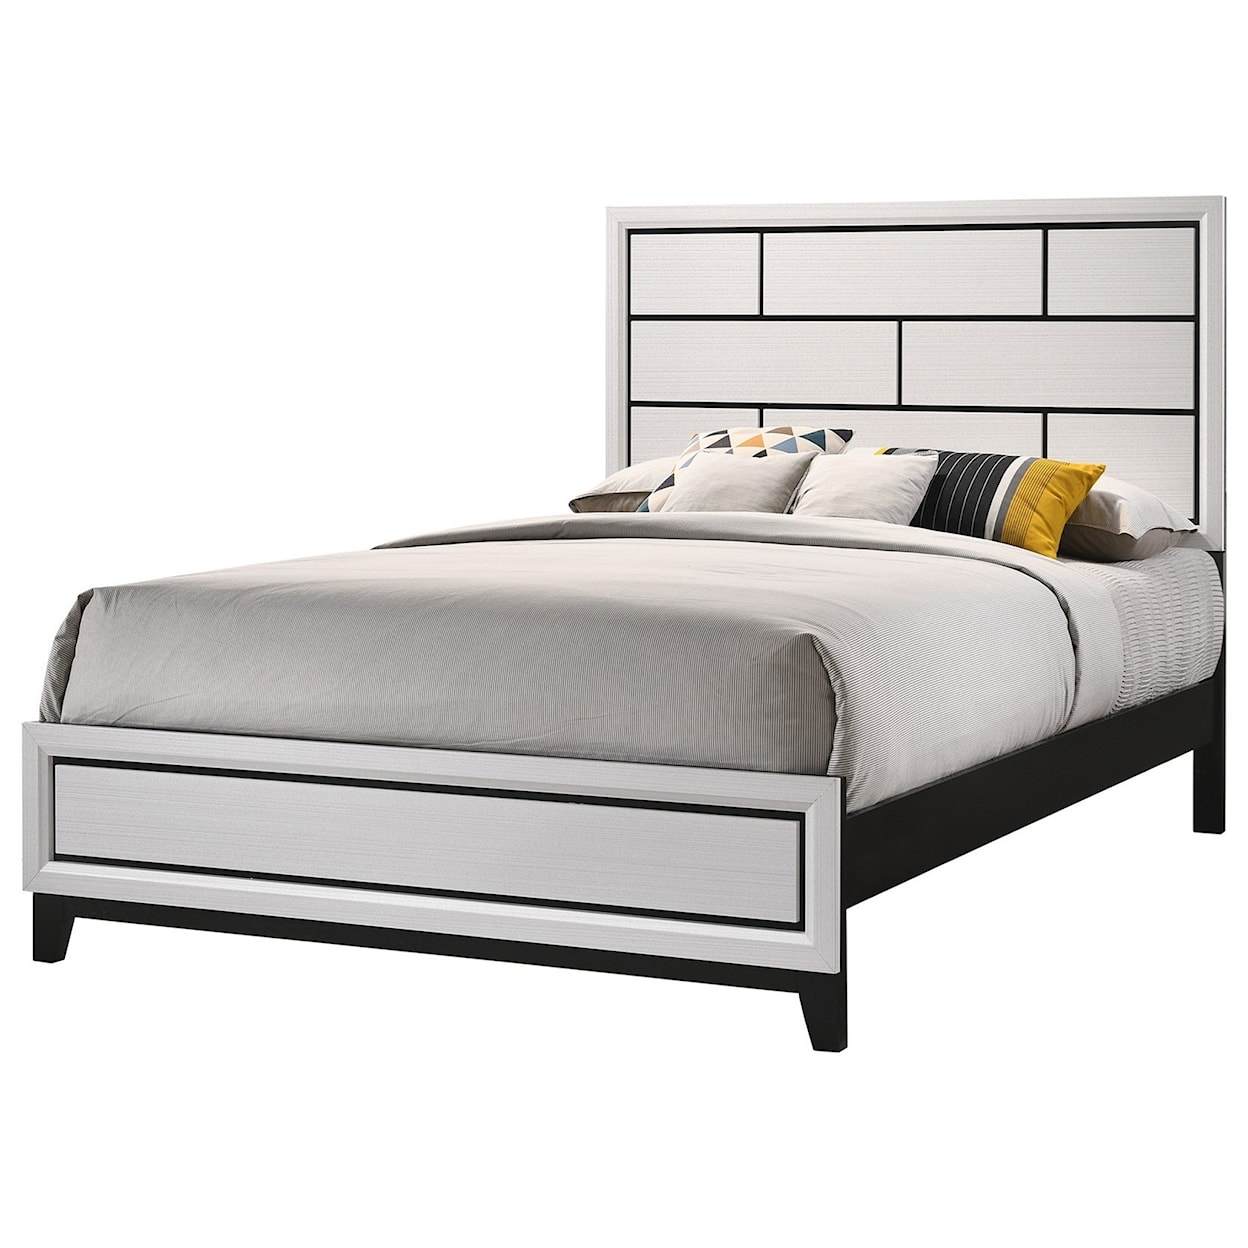 Crown Mark Akerson Queen Bed